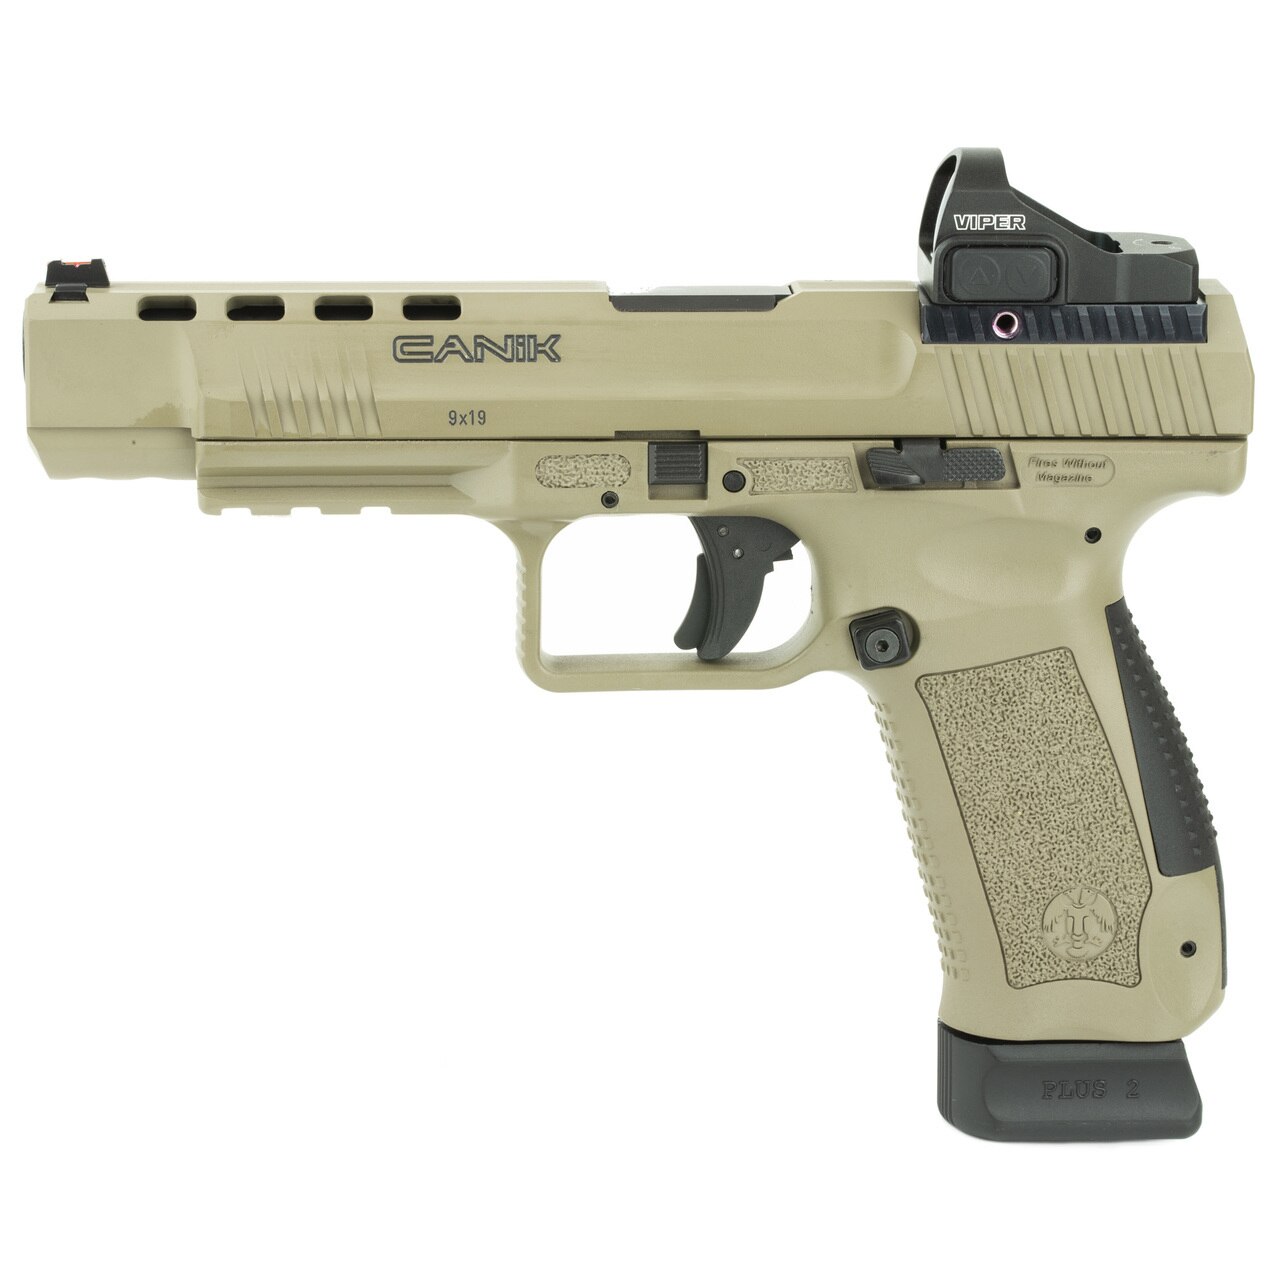 Image of Canik TP9SFx 9mm, 5.2" Barrel, Flat Dark Earth, 2- 20rd Mags, Vortex Red Dot